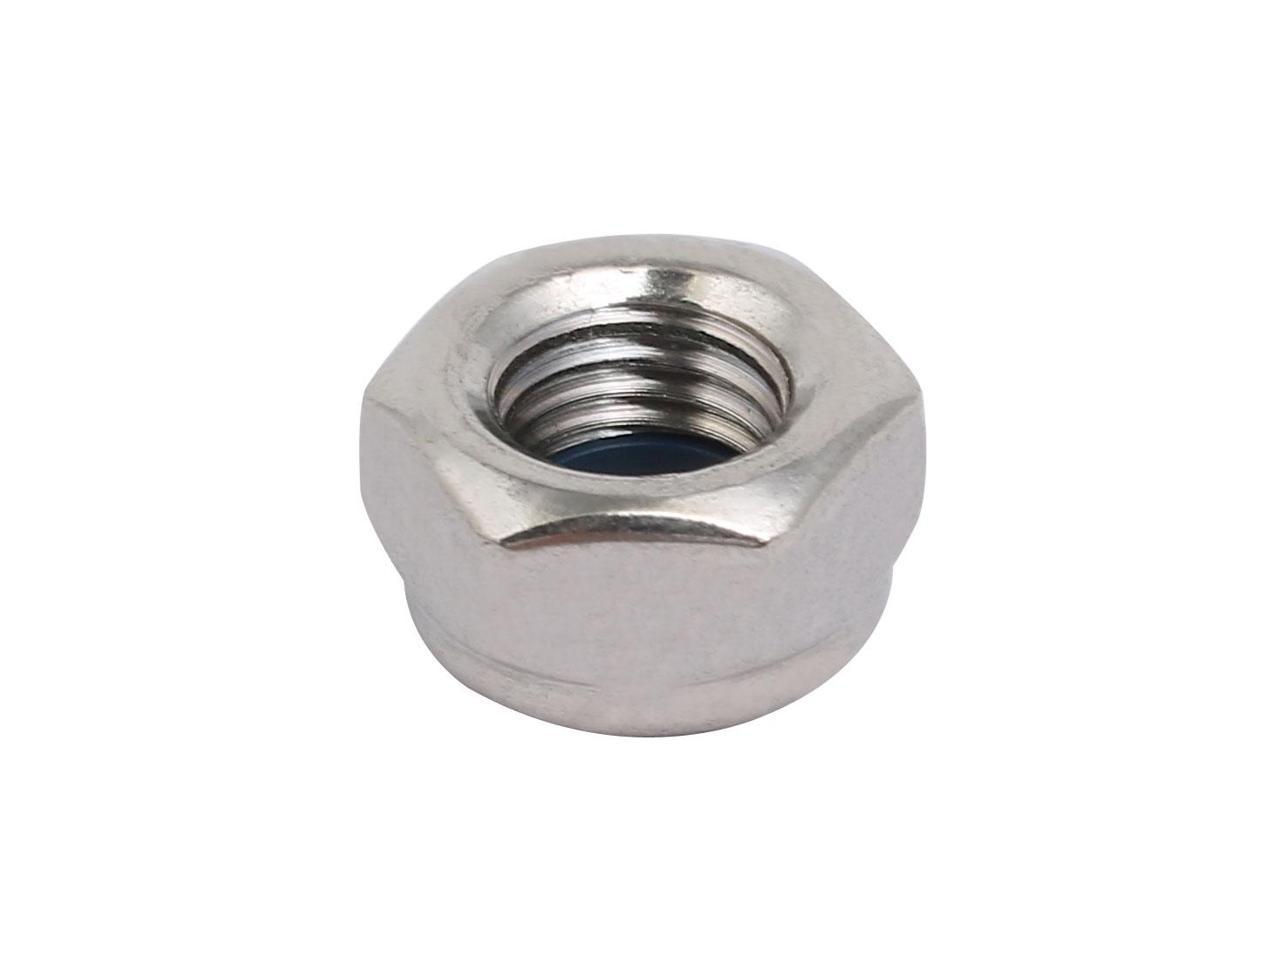 4pcs M10 x 1.25 mm Pitch Stainless Steel Right Hand Thread Hex Nut Metric 